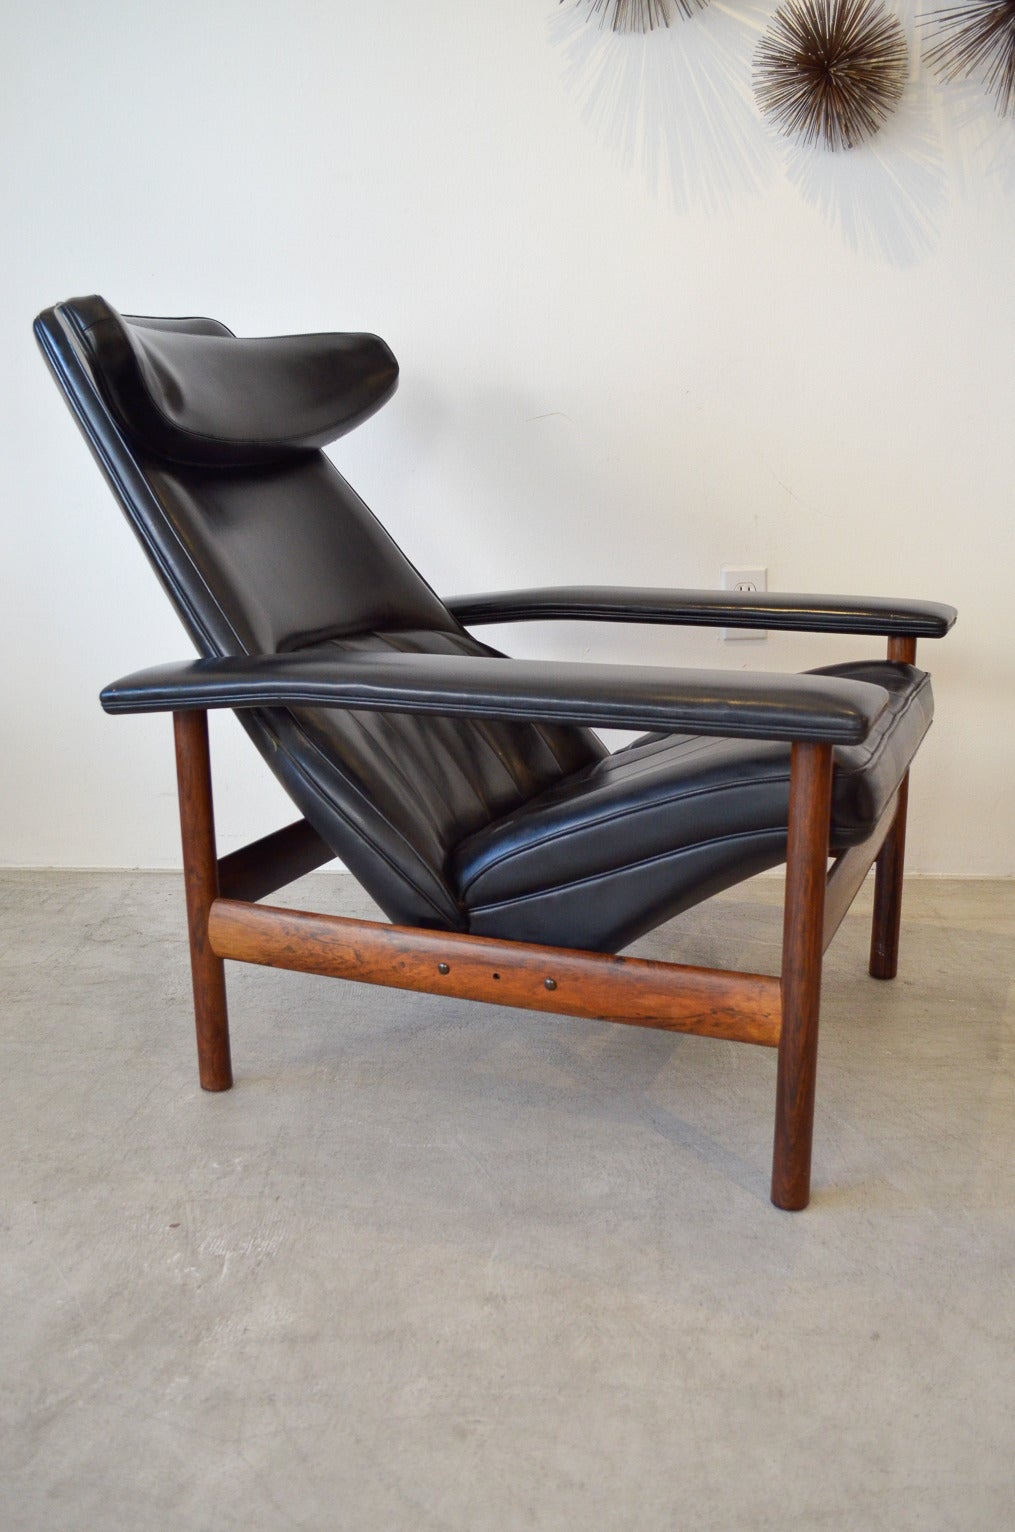 Mid-20th Century Rare Rosewood Lounge Chair and Ottoman by Sven Ivar Dysthe